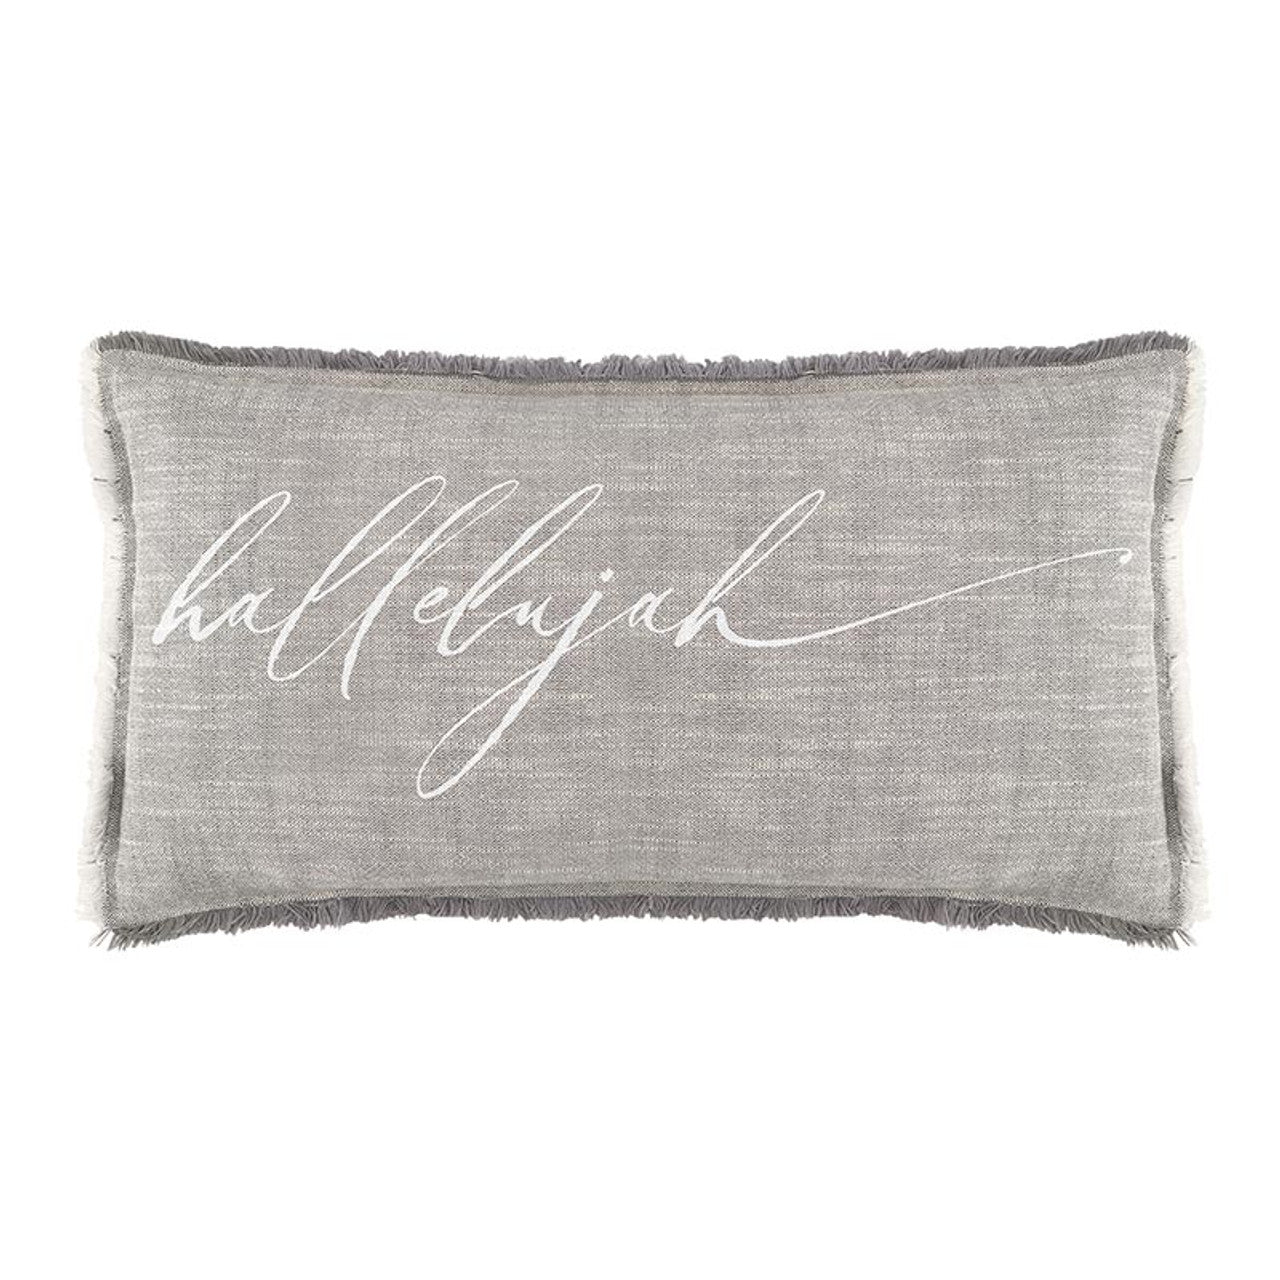 This Fringed Hallelujah Lumbar Pillow is perfect for bringing some faith into your home décor. It is crafted from quality 100% cotton fabric and filled with a duck feather down insert. The pillow is dark gray with white lettering and features a hidden zipper for easy removal. Measuring 29" W x 14" H, it is sure to add a special touch to your space.